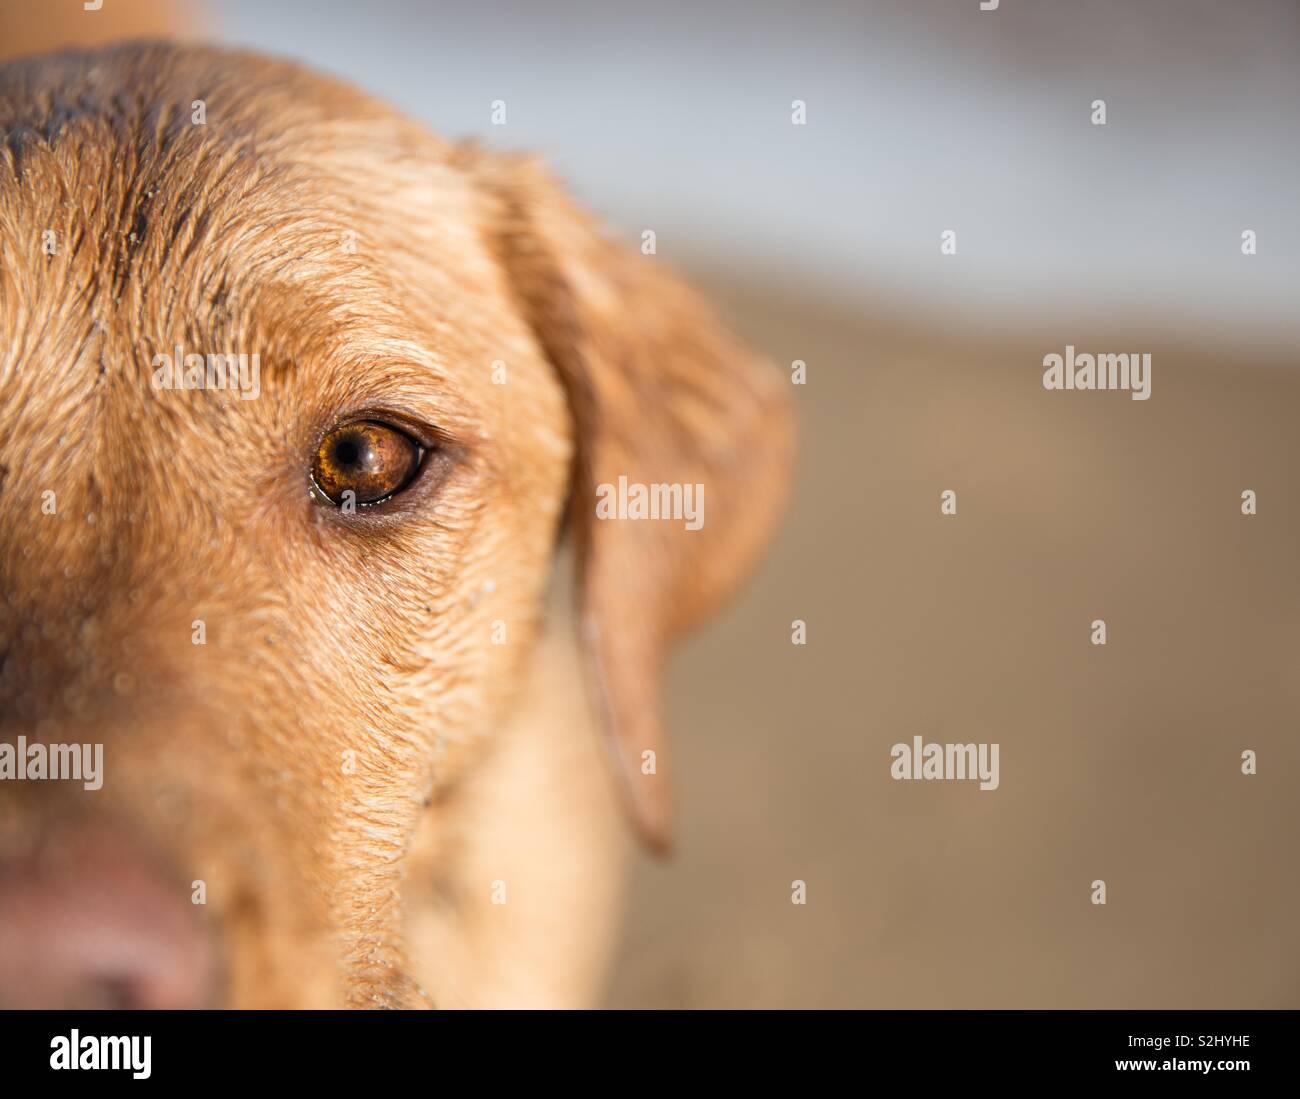 A close up portrait of a yellow Labrador retriever dog standing on a sandy beach and focussing on it’s clear brown eyes with copy space Stock Photo